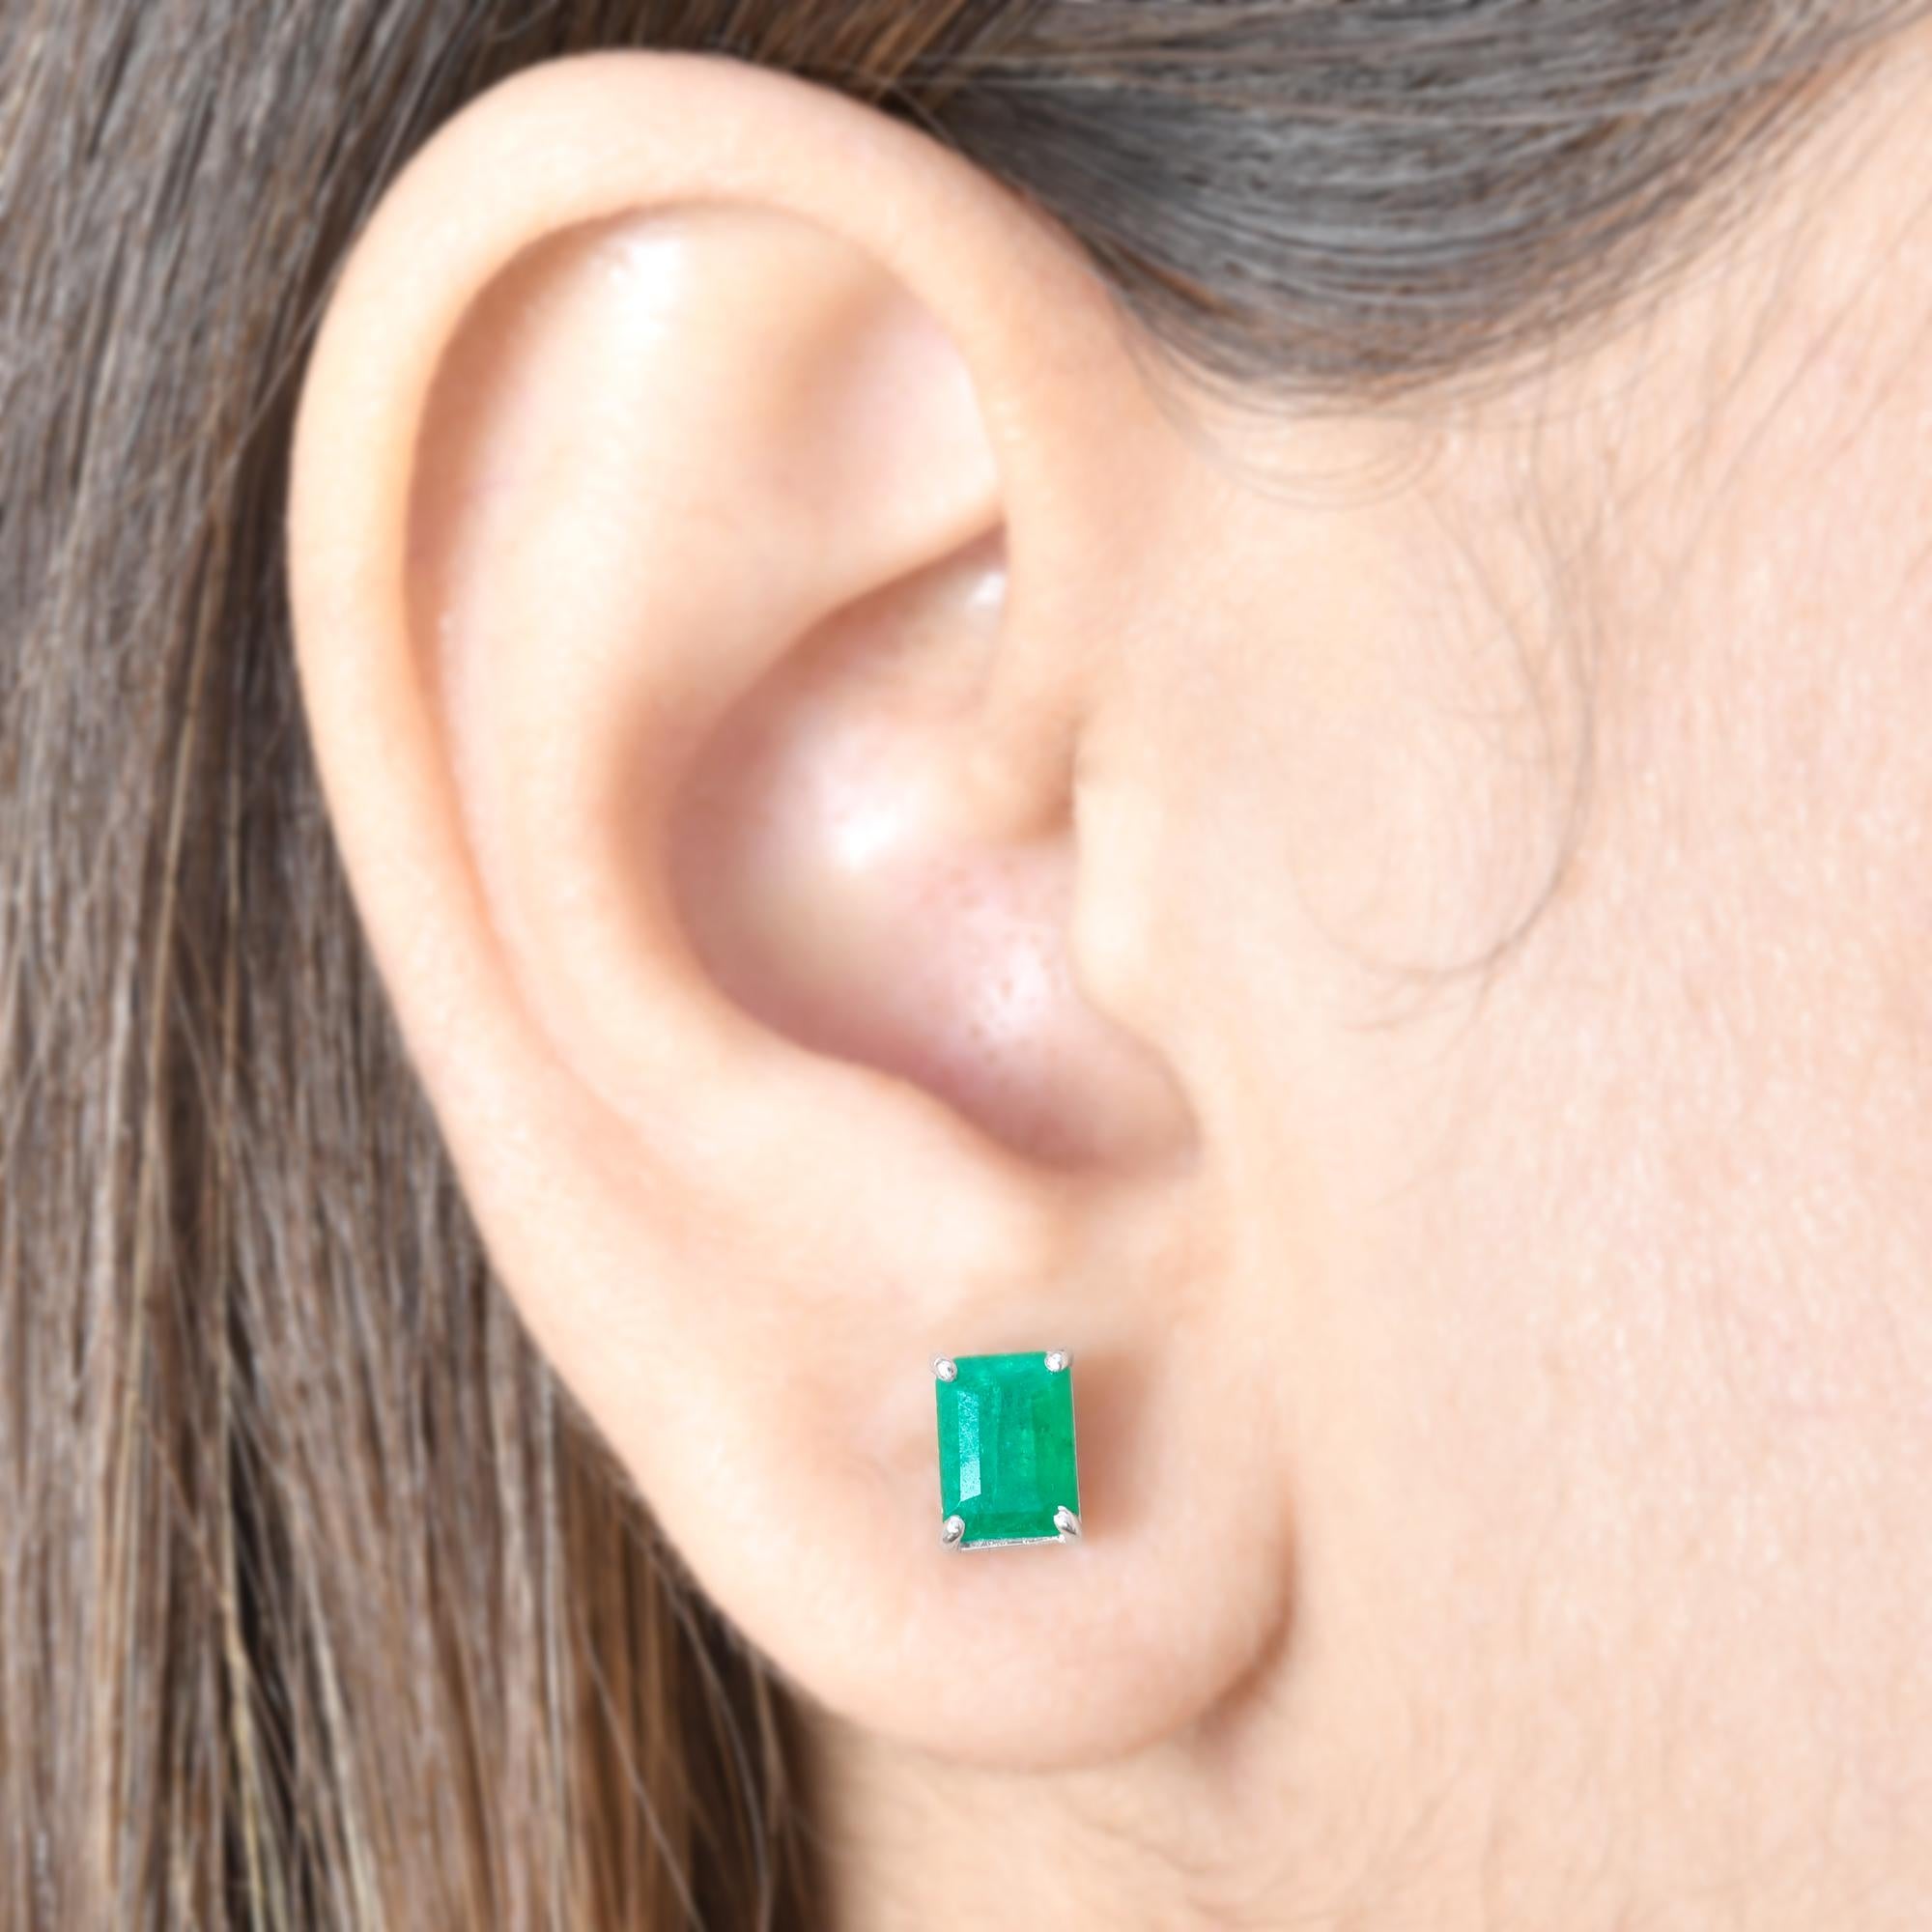 Asscher Cut 1.95 Carat Natural Emerald Gemstone Stud Earrings Solid 18k White Gold Jewelry For Sale